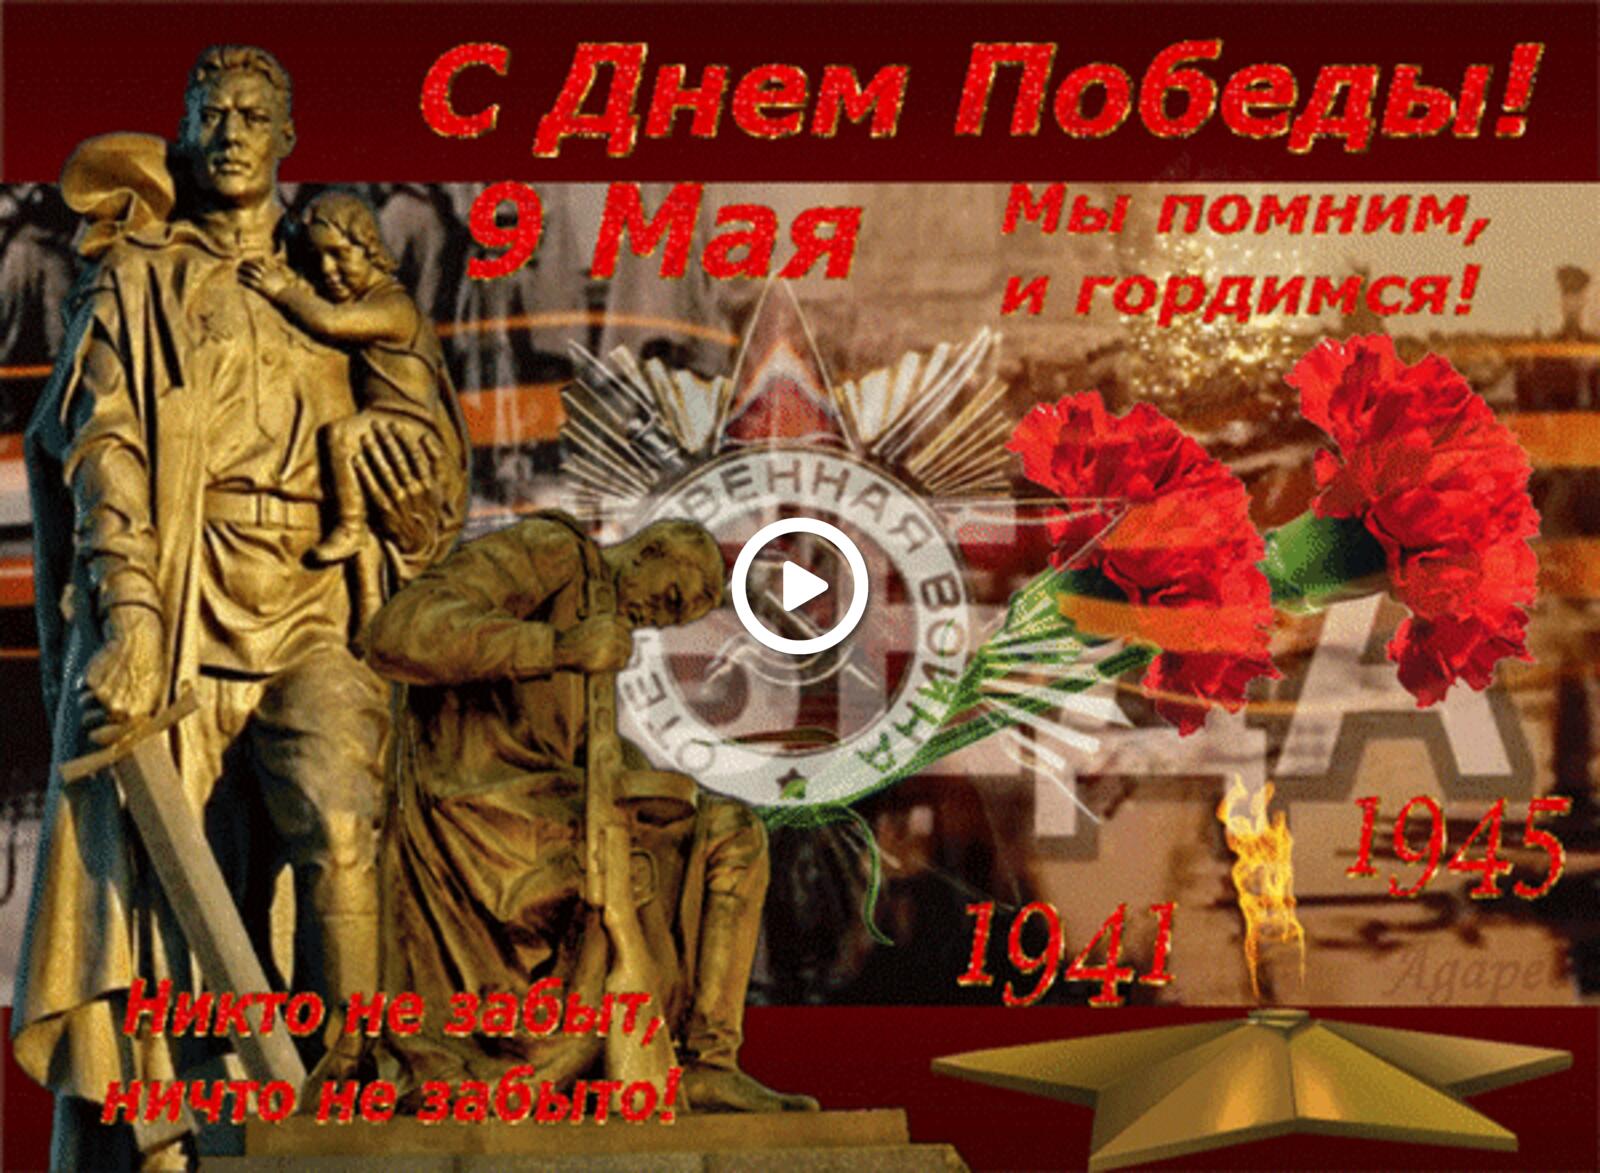 A postcard on the subject of we remember we are proud animation may 9 victory day for free